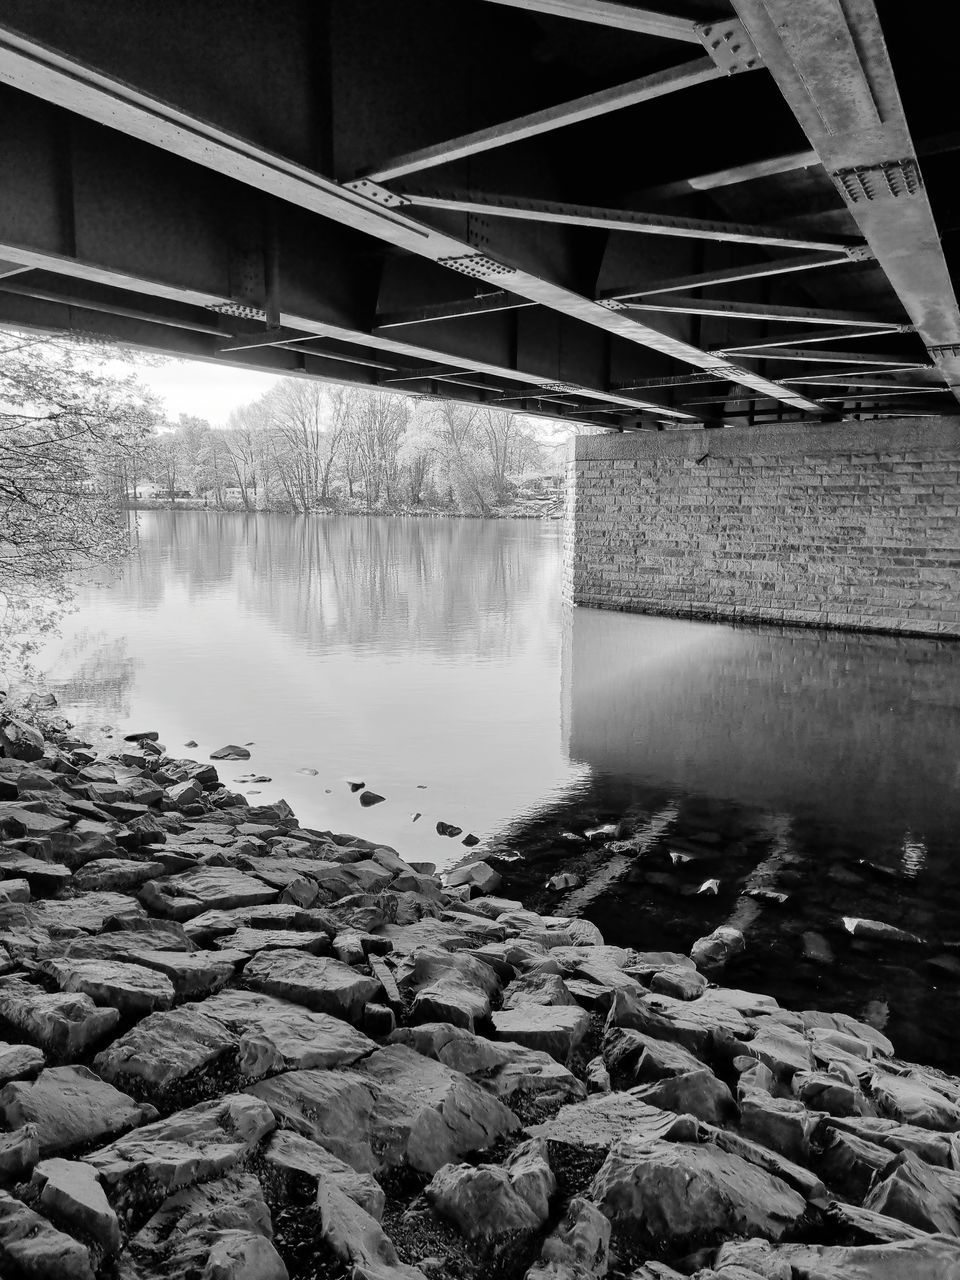 black and white, monochrome, water, monochrome photography, architecture, built structure, black, darkness, reflection, white, no people, bridge, nature, river, day, outdoors, rock